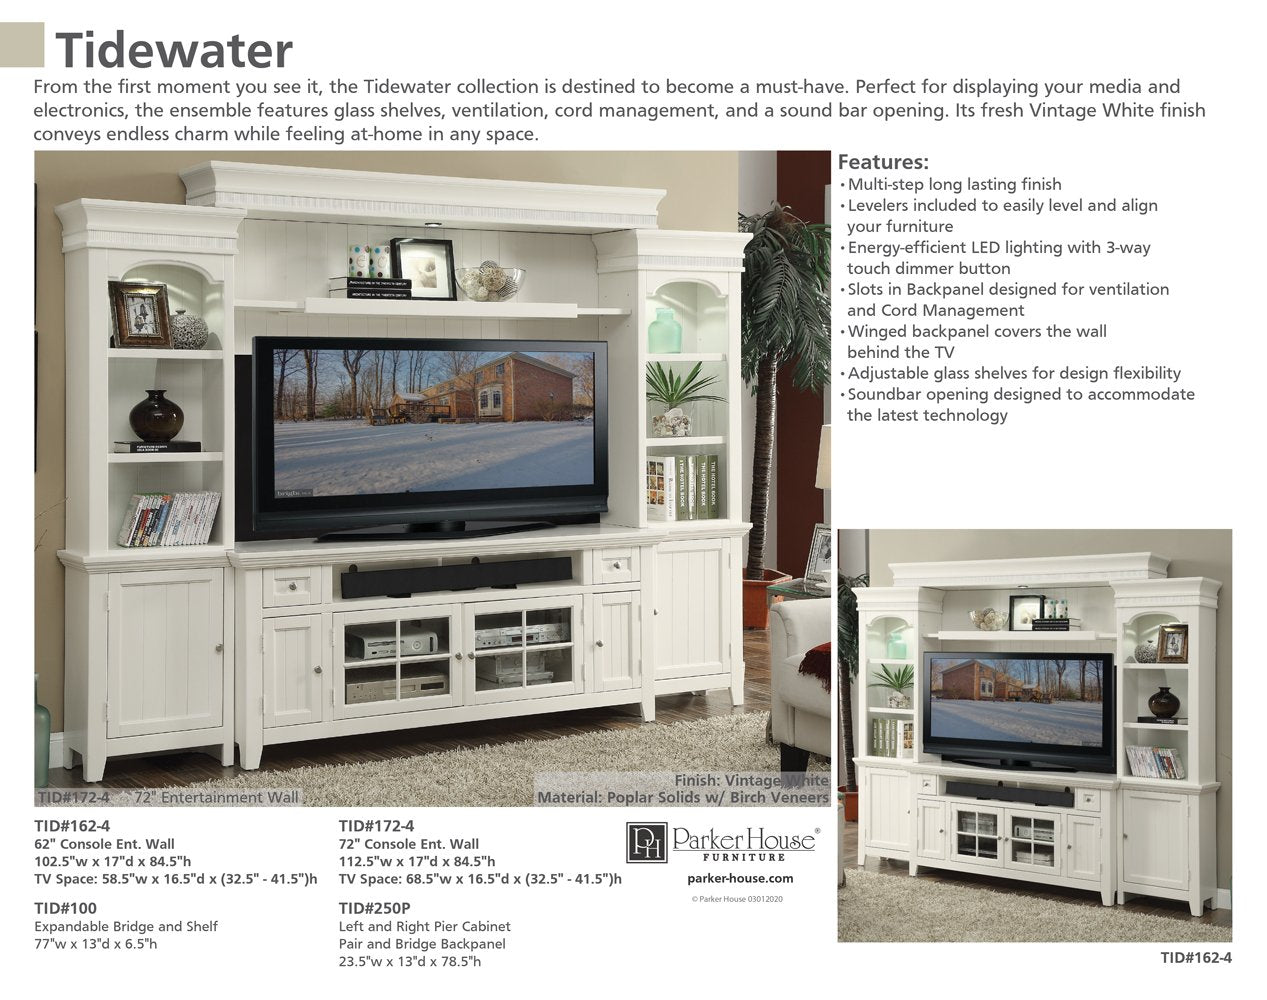 TIDEWATER 72 IN. CONSOLE ENTERTAINMENT WALL